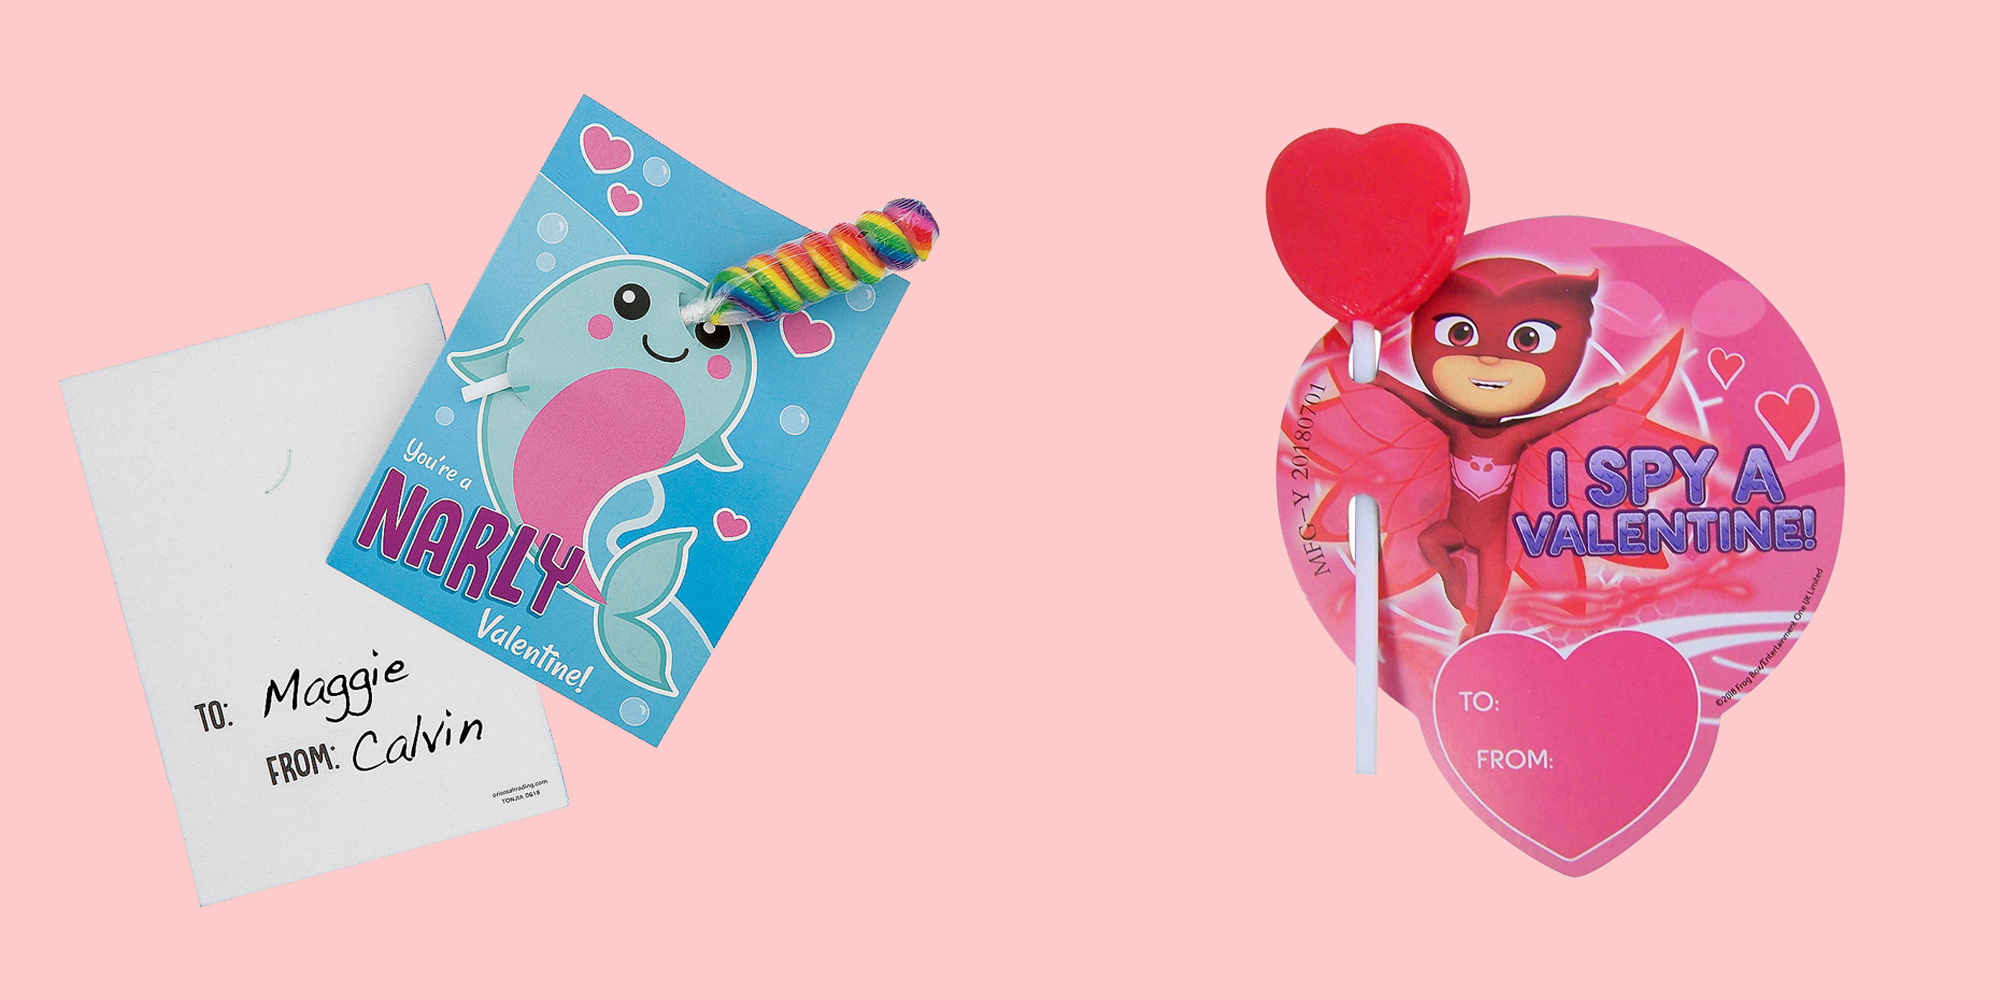 outlet-shopping-kids-valentines-cards-for-school-classroom-valentines